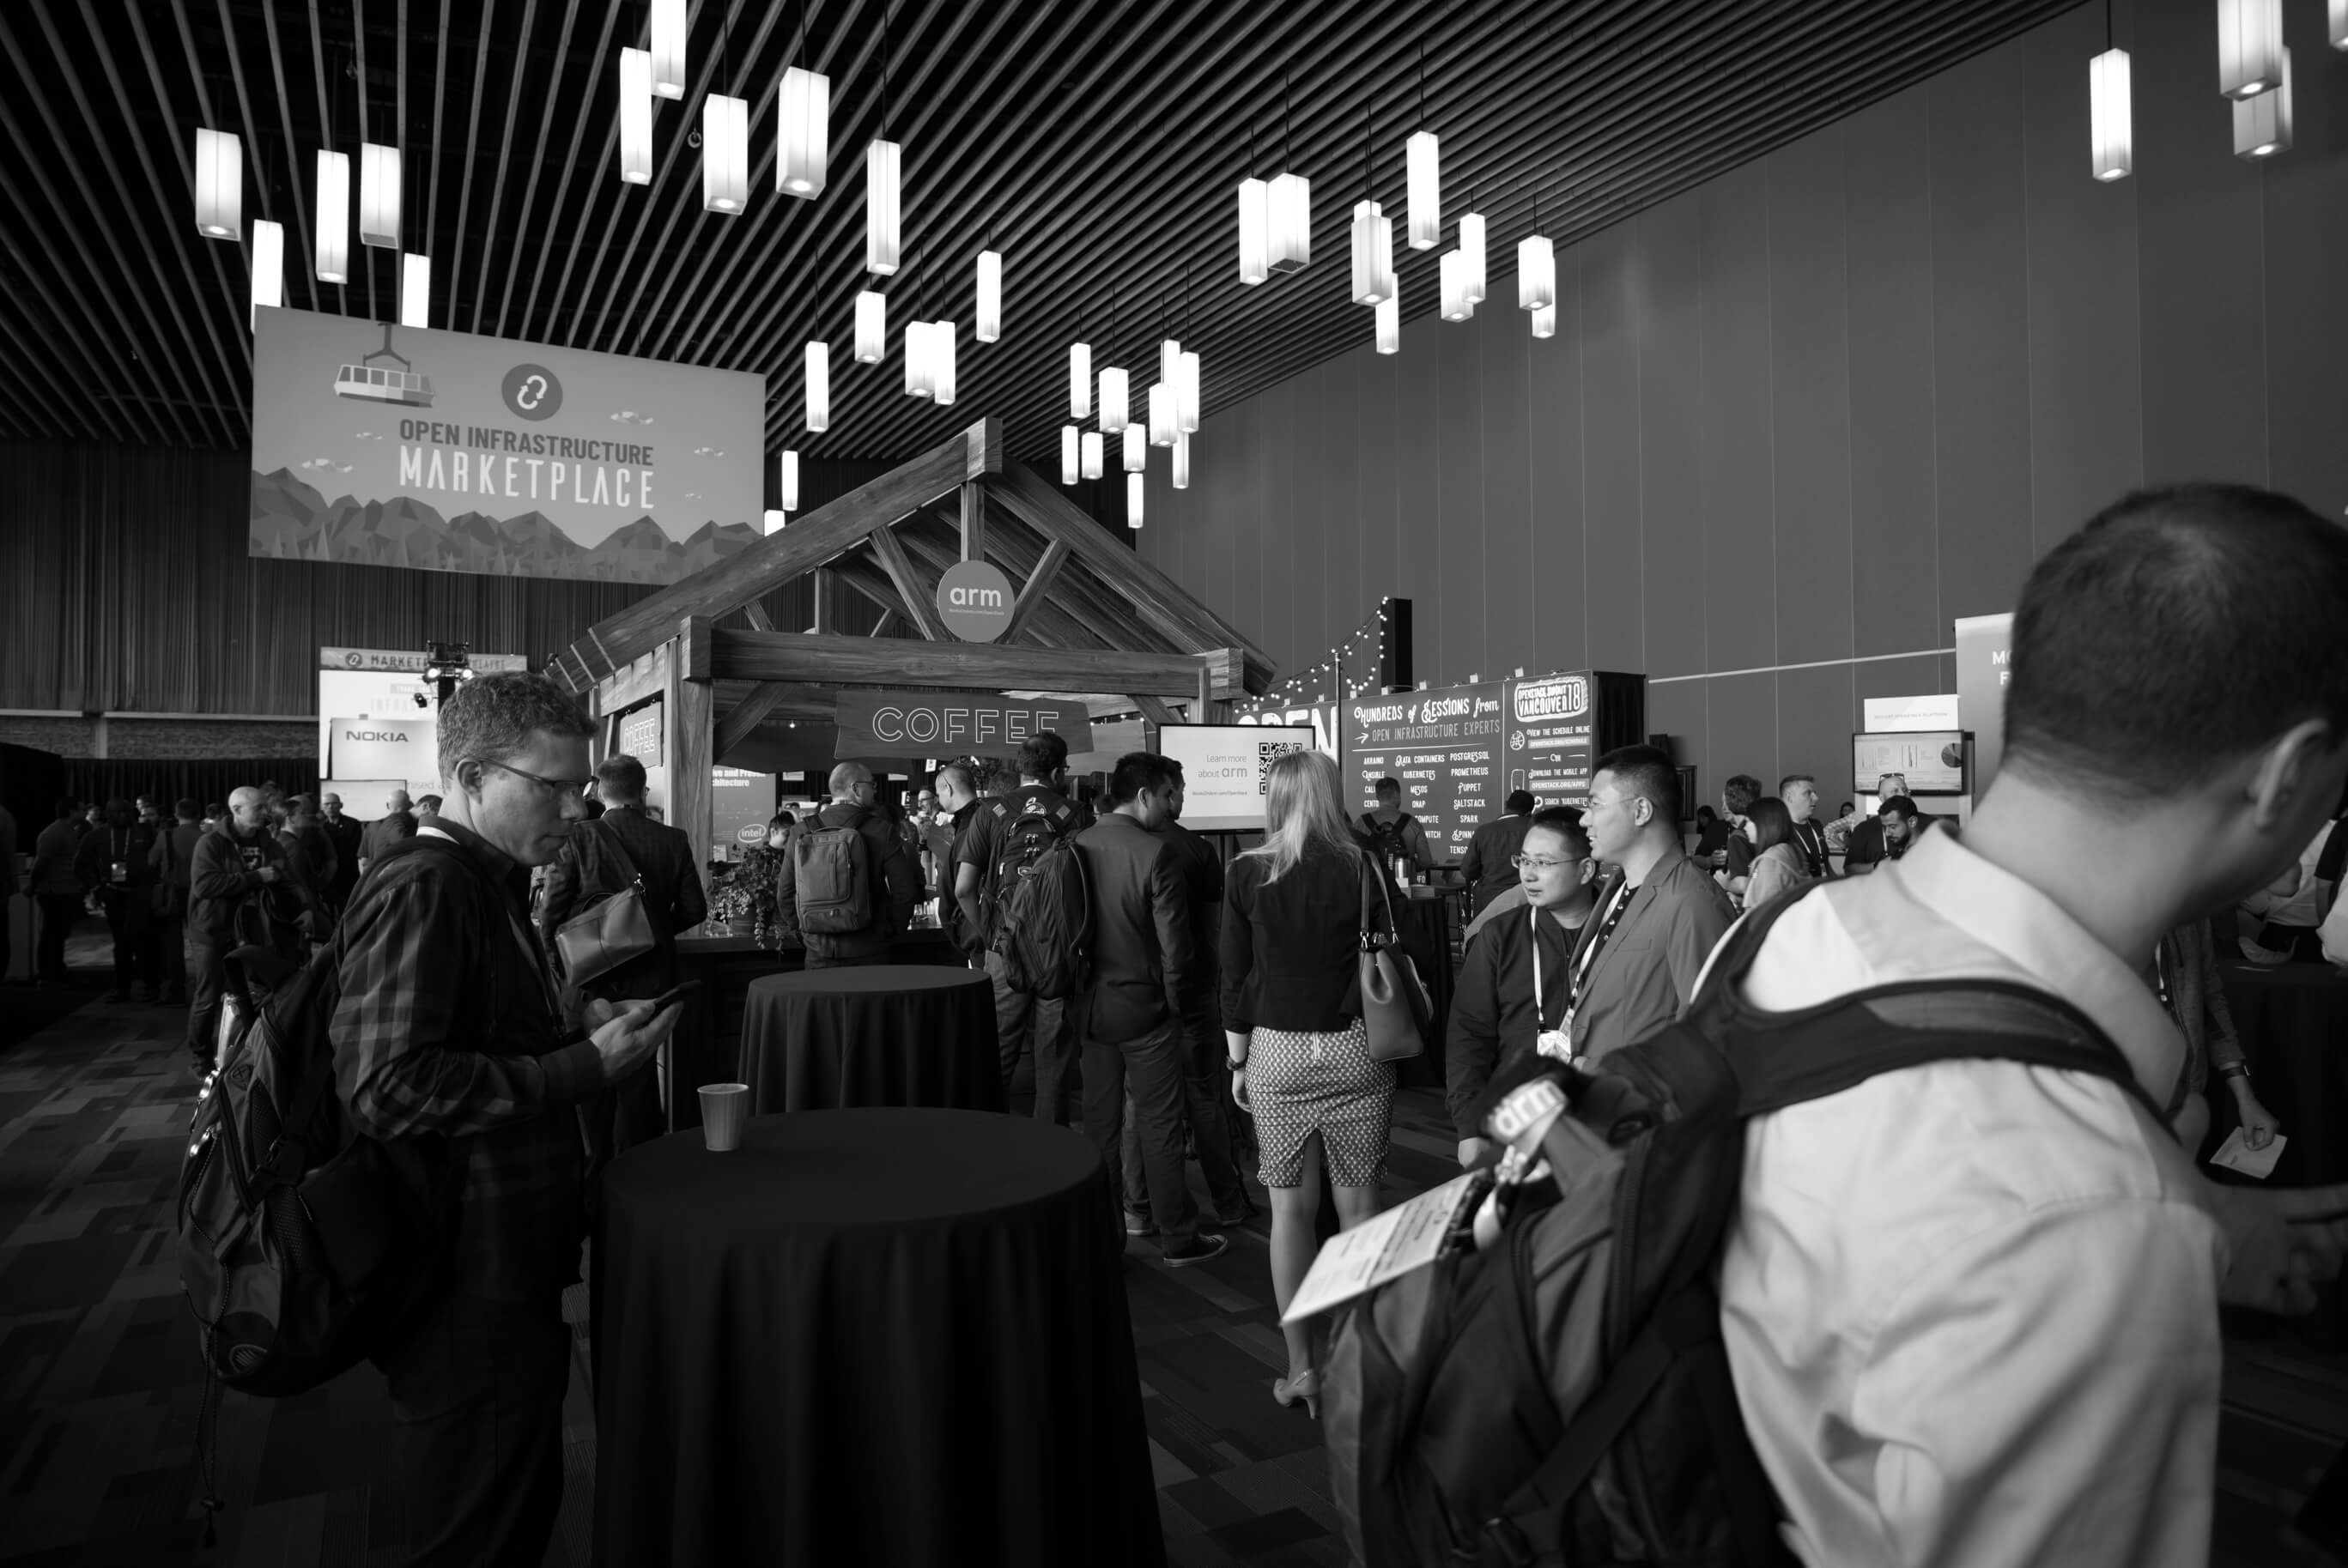 OpenStack Vancouver 2018 - Photo credit: Jason Brown, Global Solutions Architect, atmail